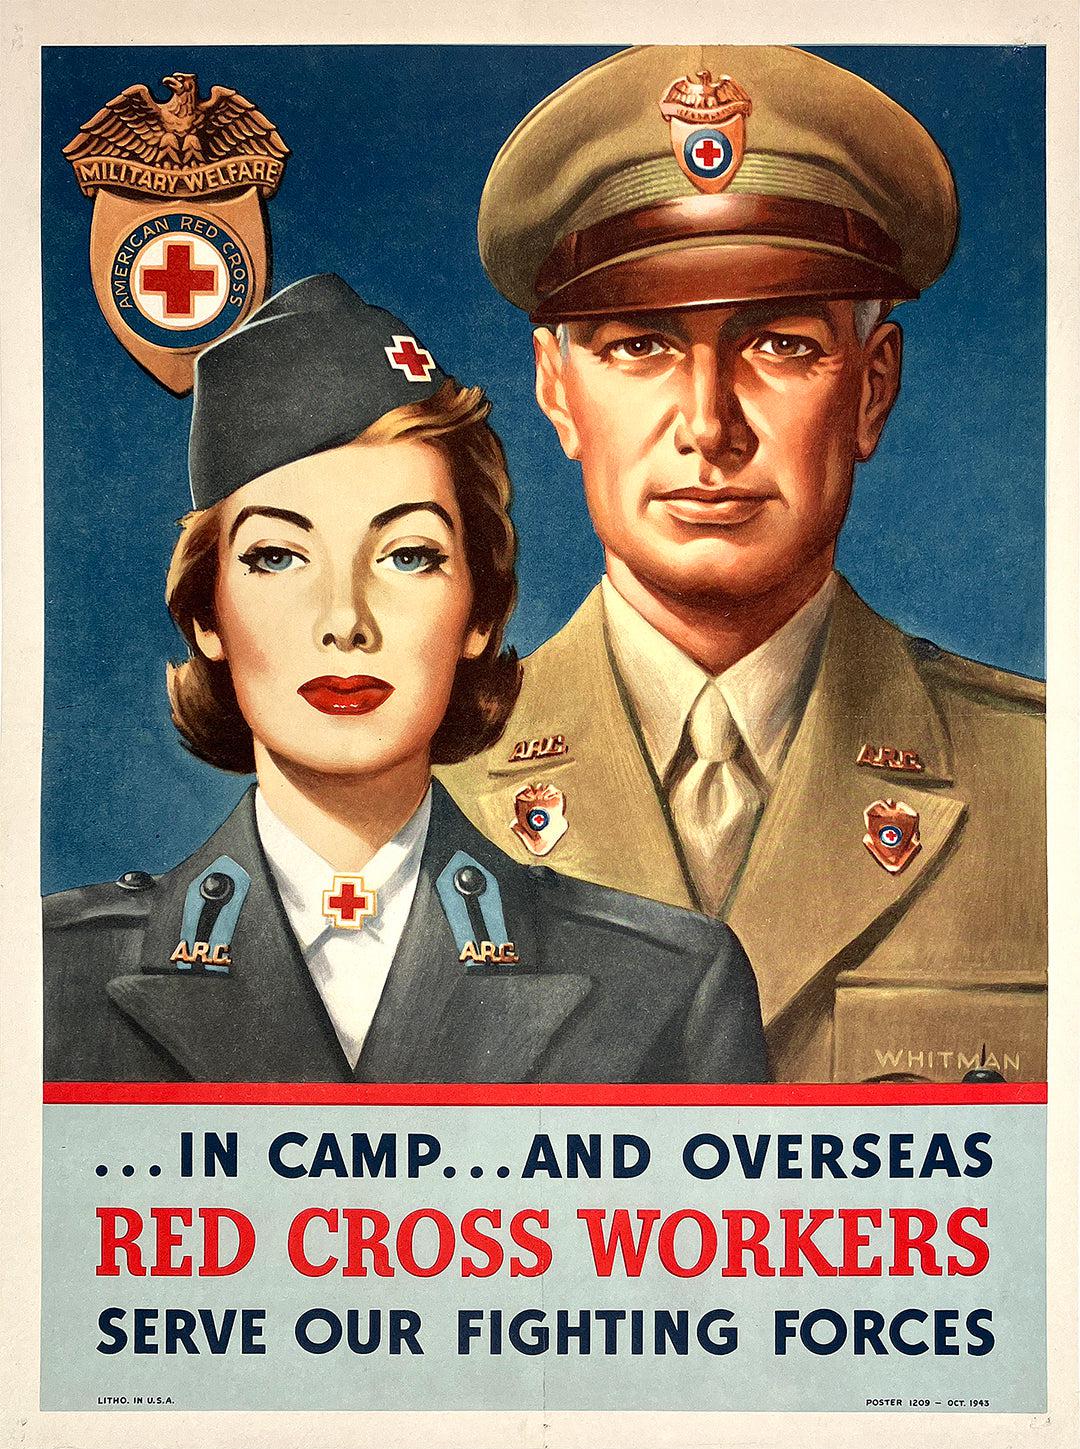 Original Vintage Poster Red Cross Workers WWII by Whitman 1943